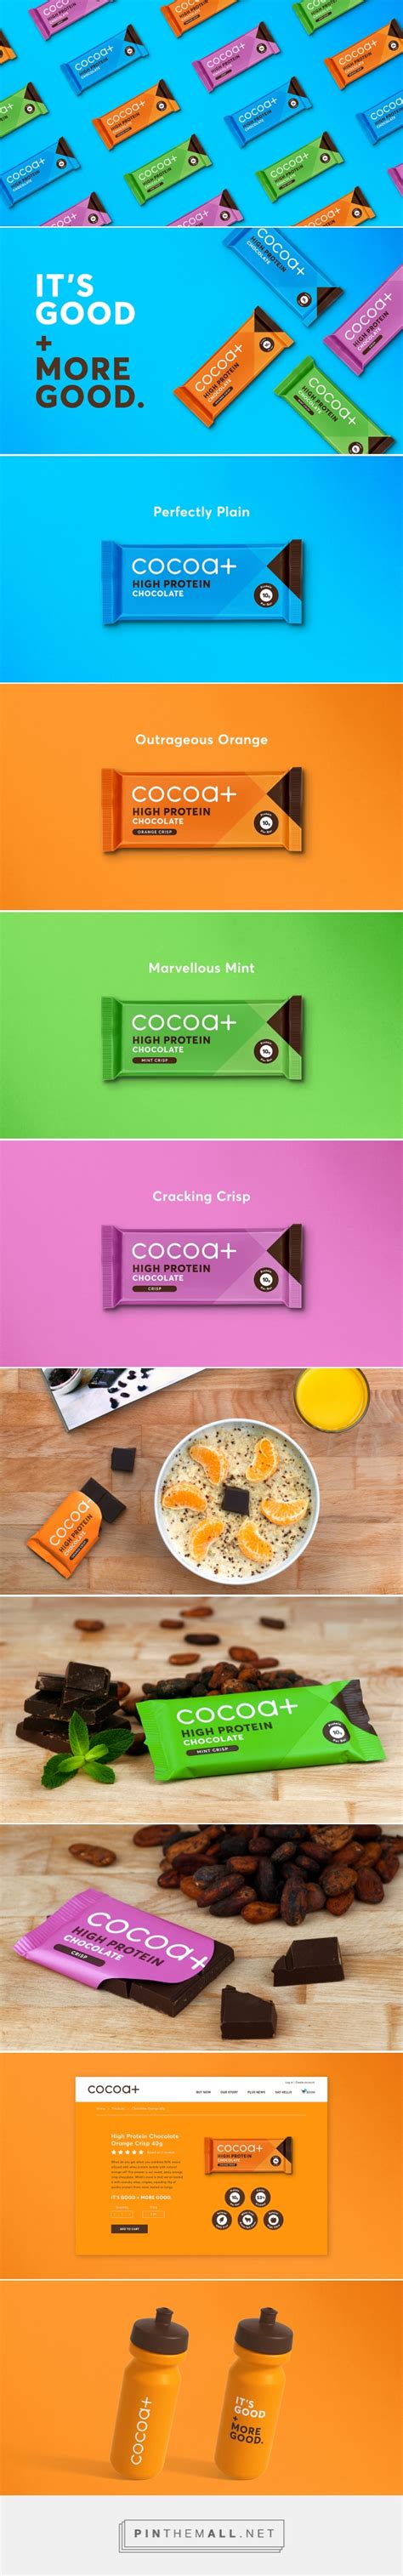 Cocoa Plus - New Flavour Range - Packaging of the World - Creative Package Design Gallery - http ...